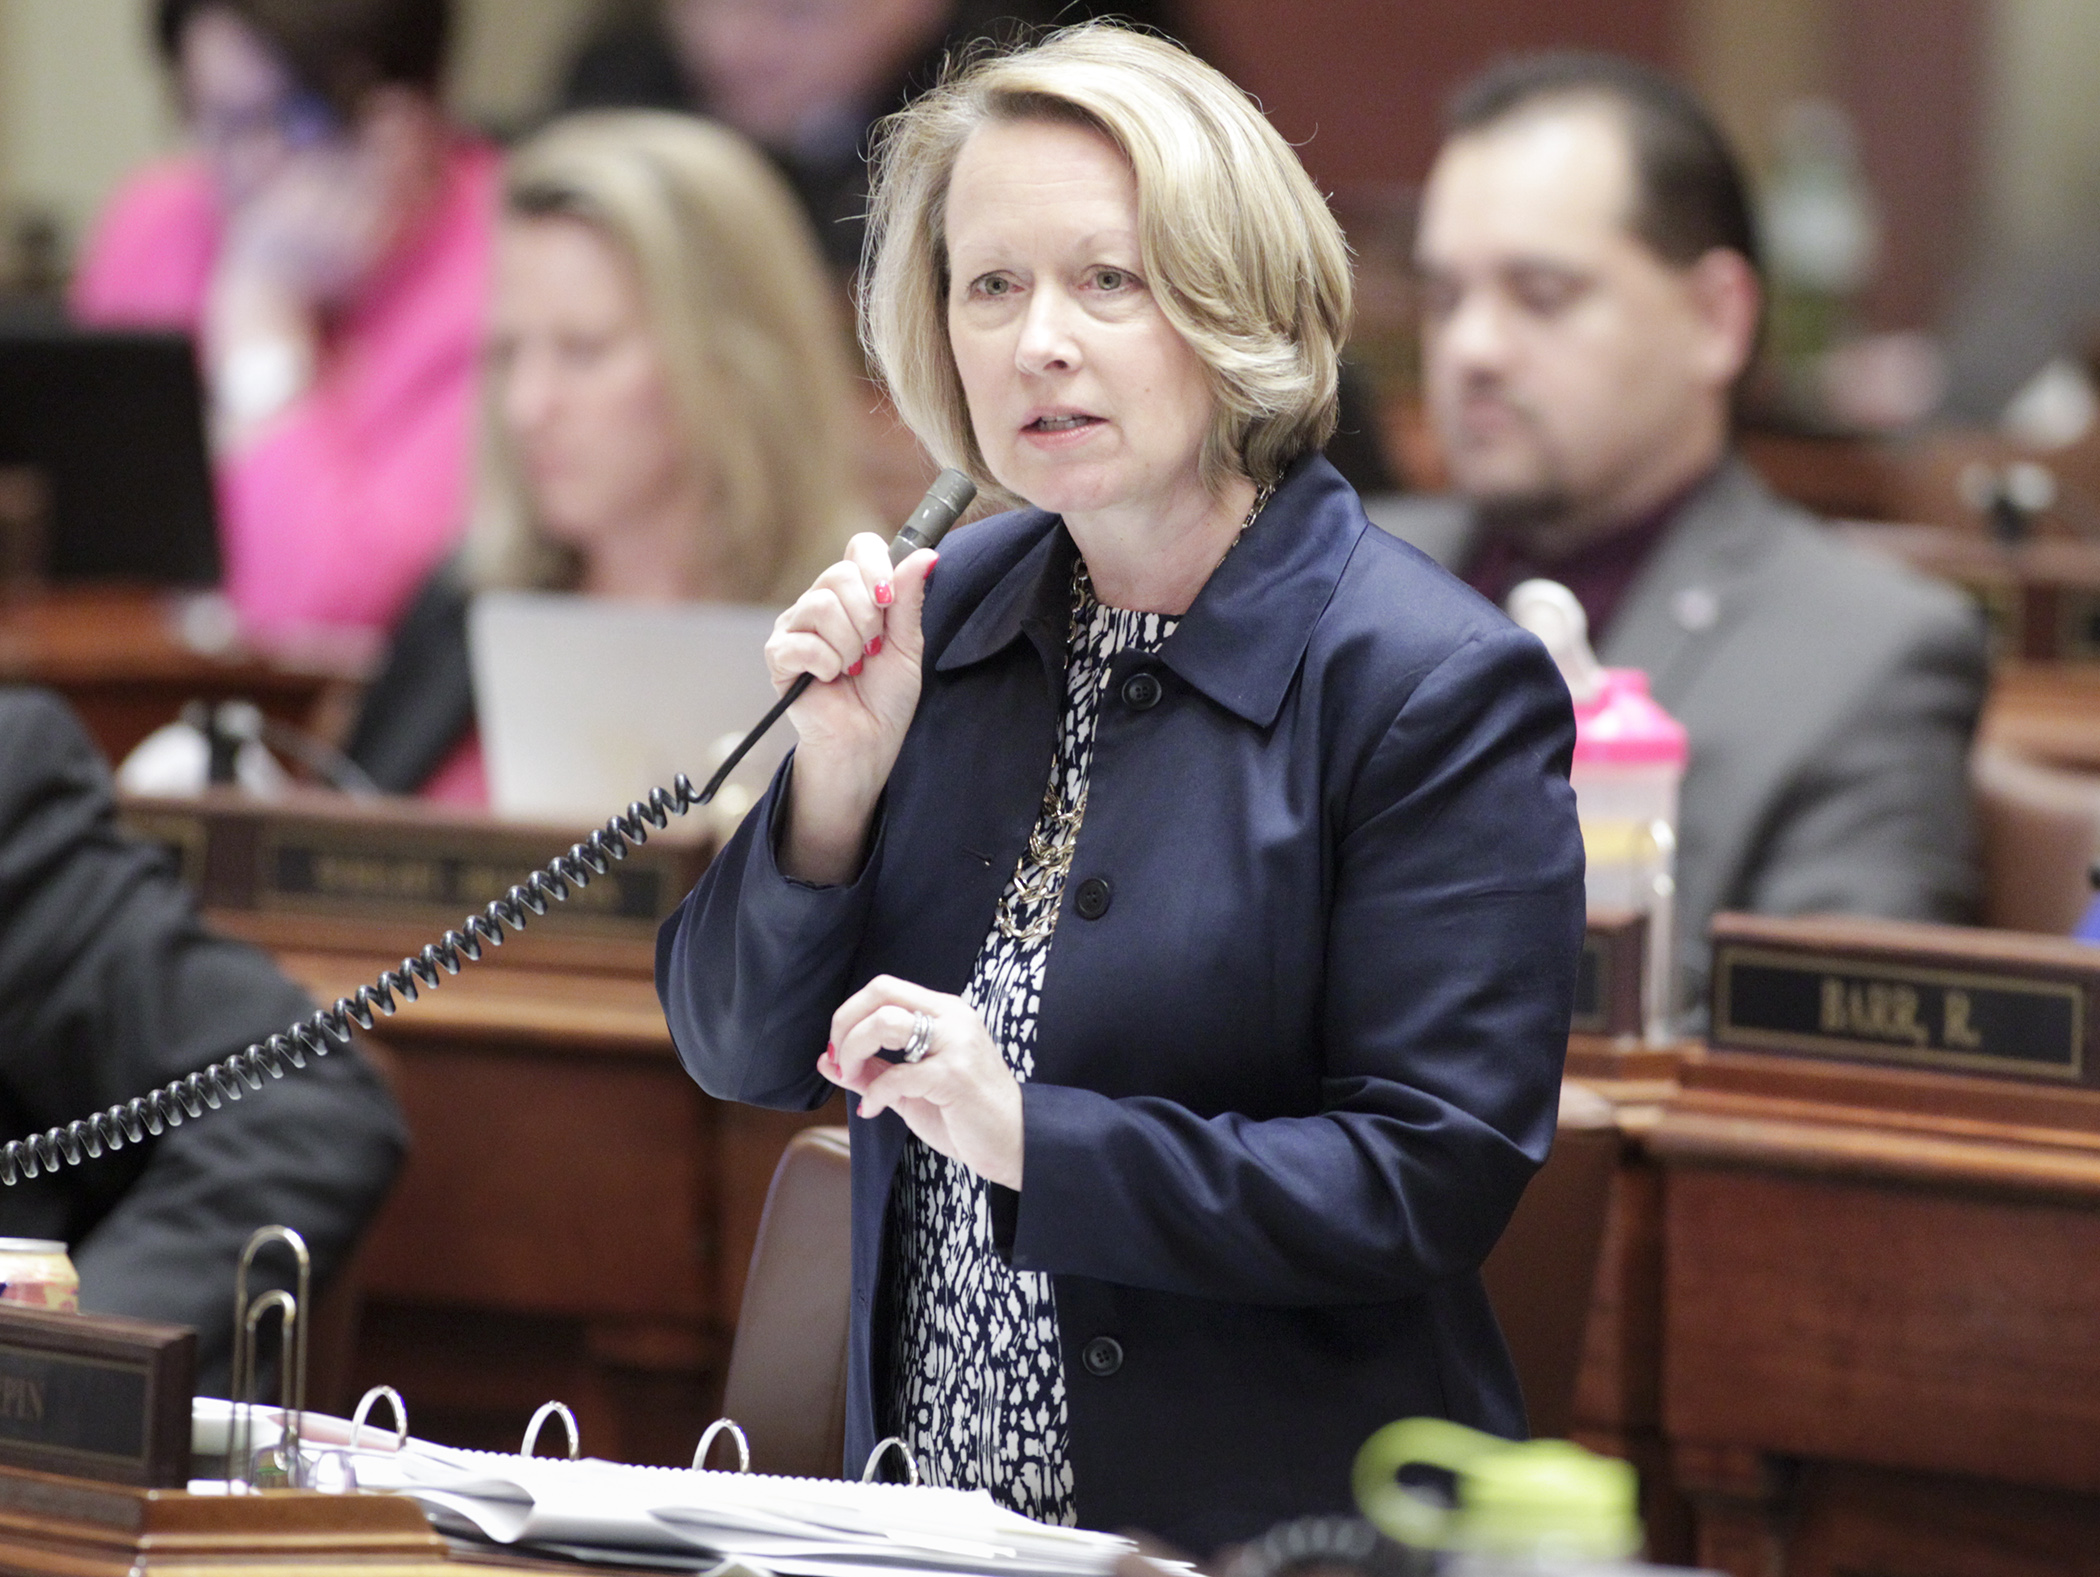 Rep. Jenifer Loon, chair of the House Education Finance Committee, comments during April 26 debate on HF4328, the omnibus education finance bill. Photo by Paul Battaglia